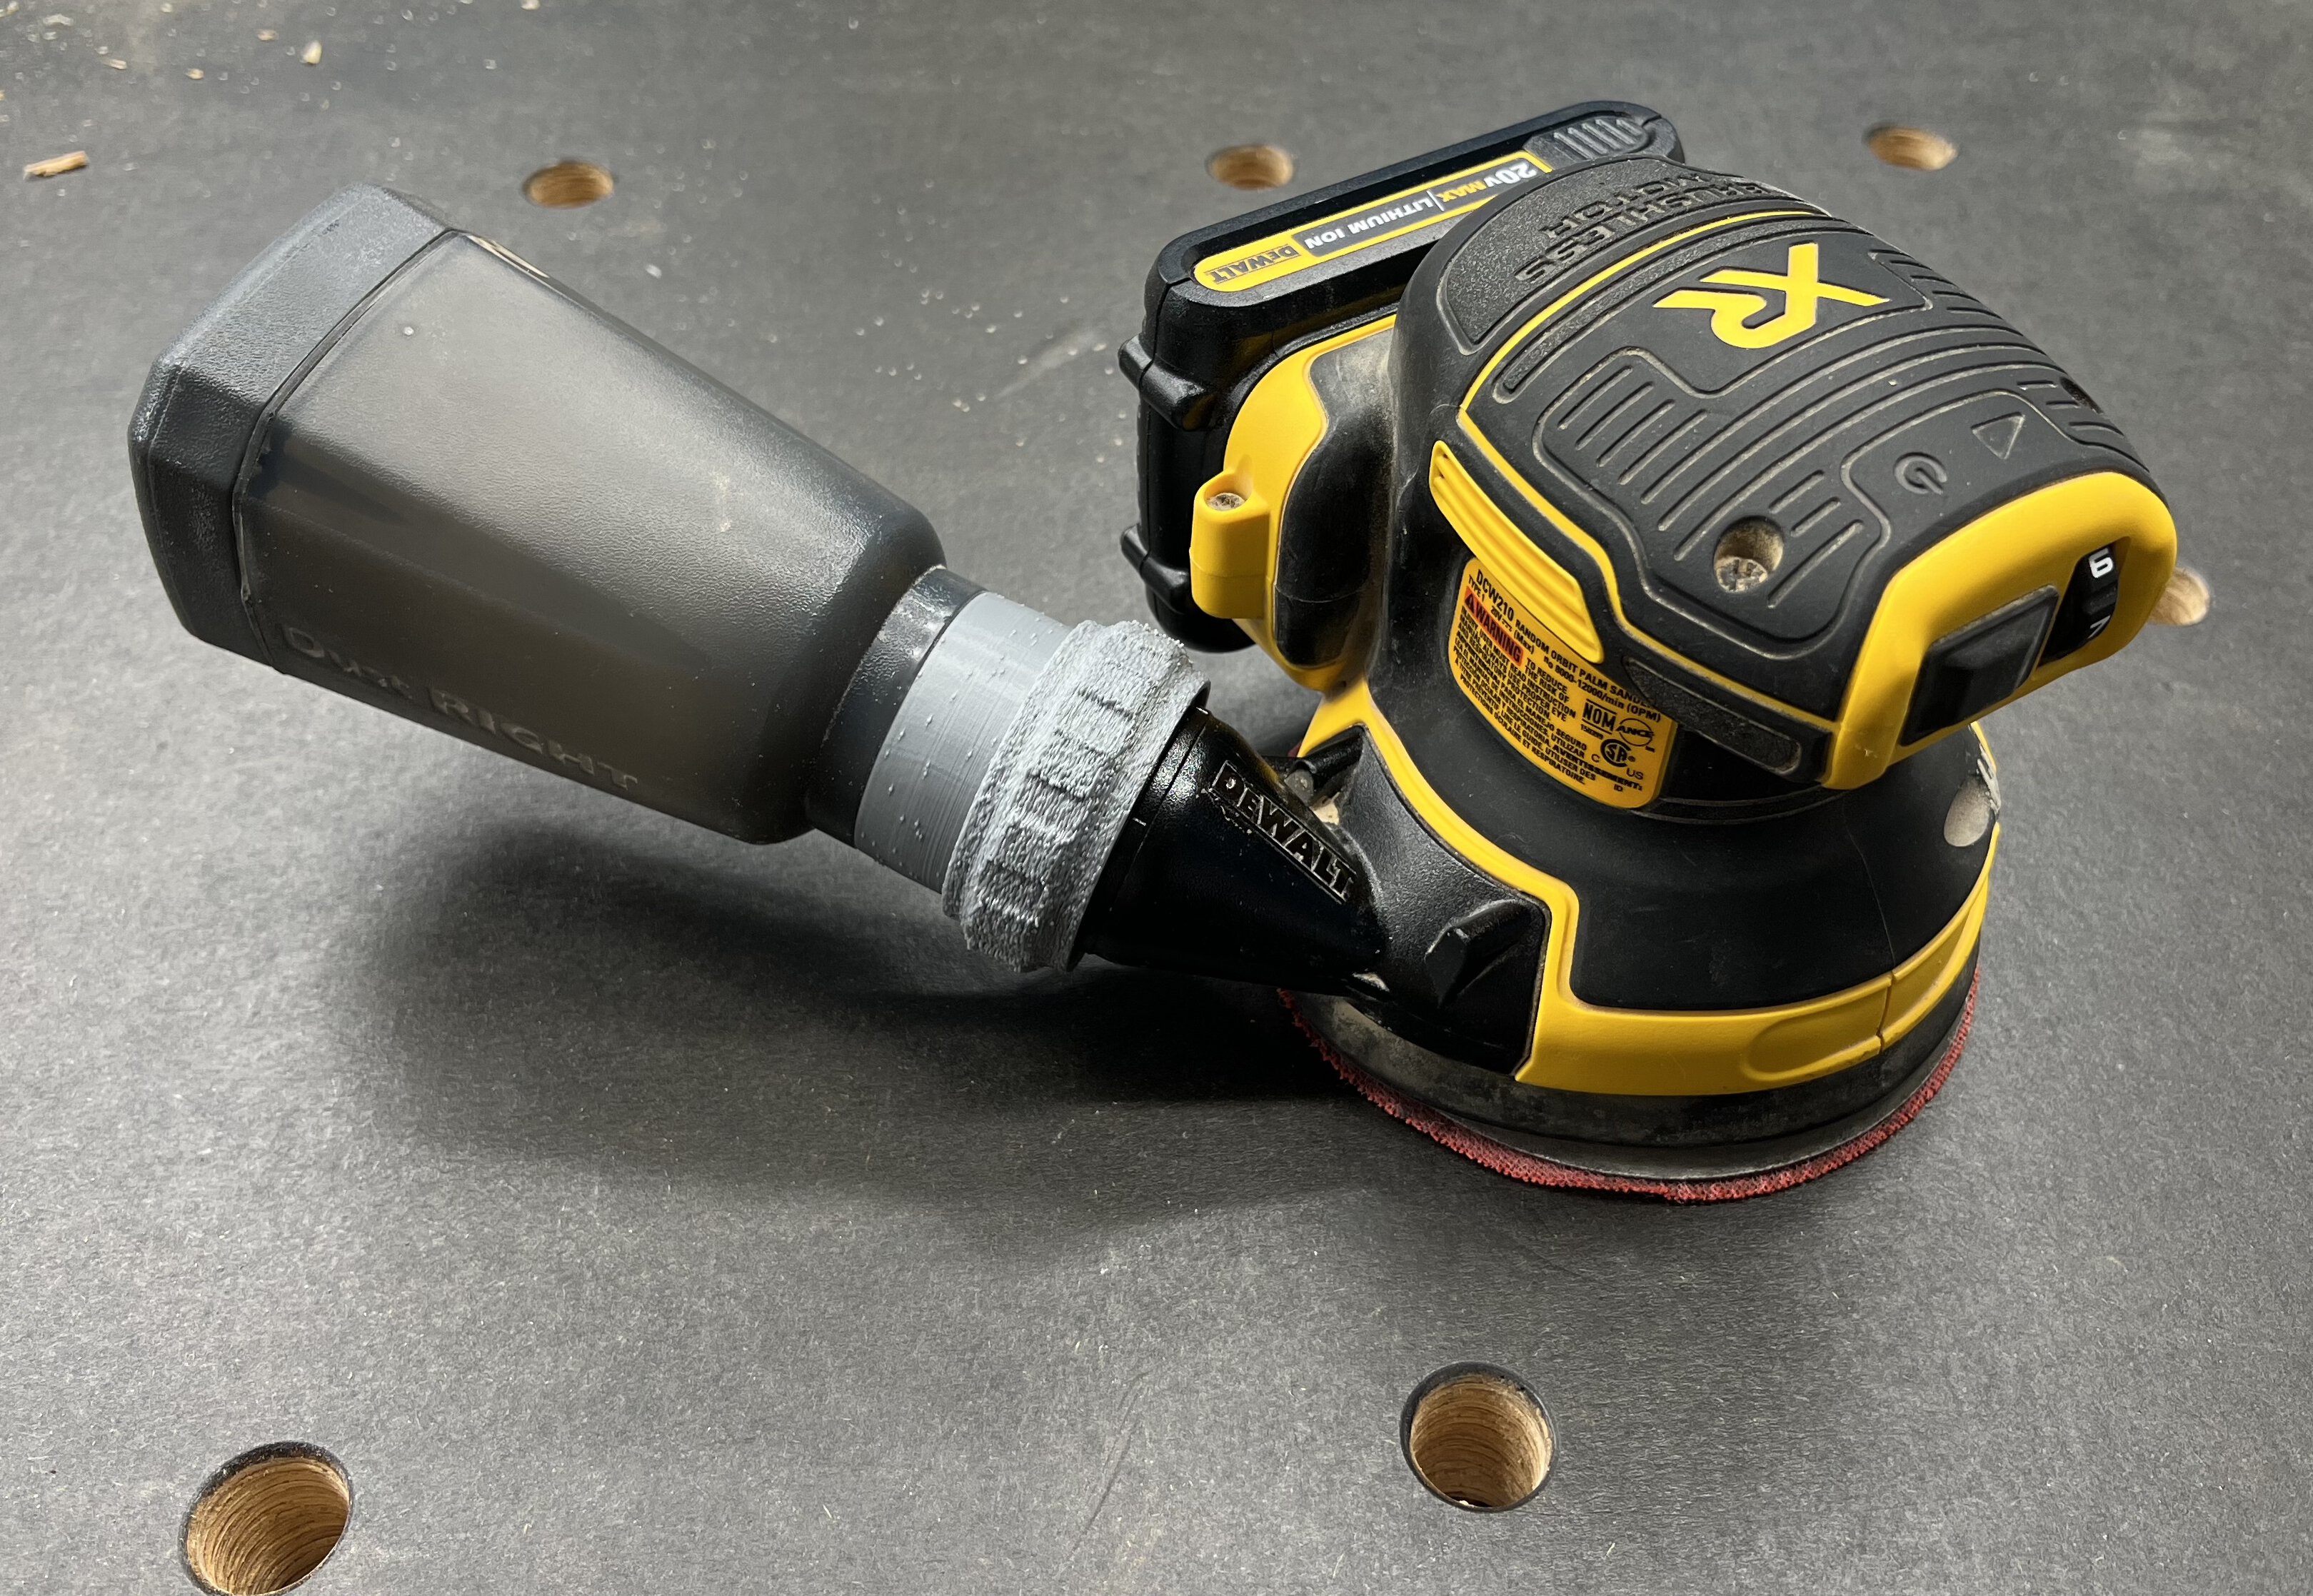 Dewalt DCW210 Sander to Dust Right canister adapter